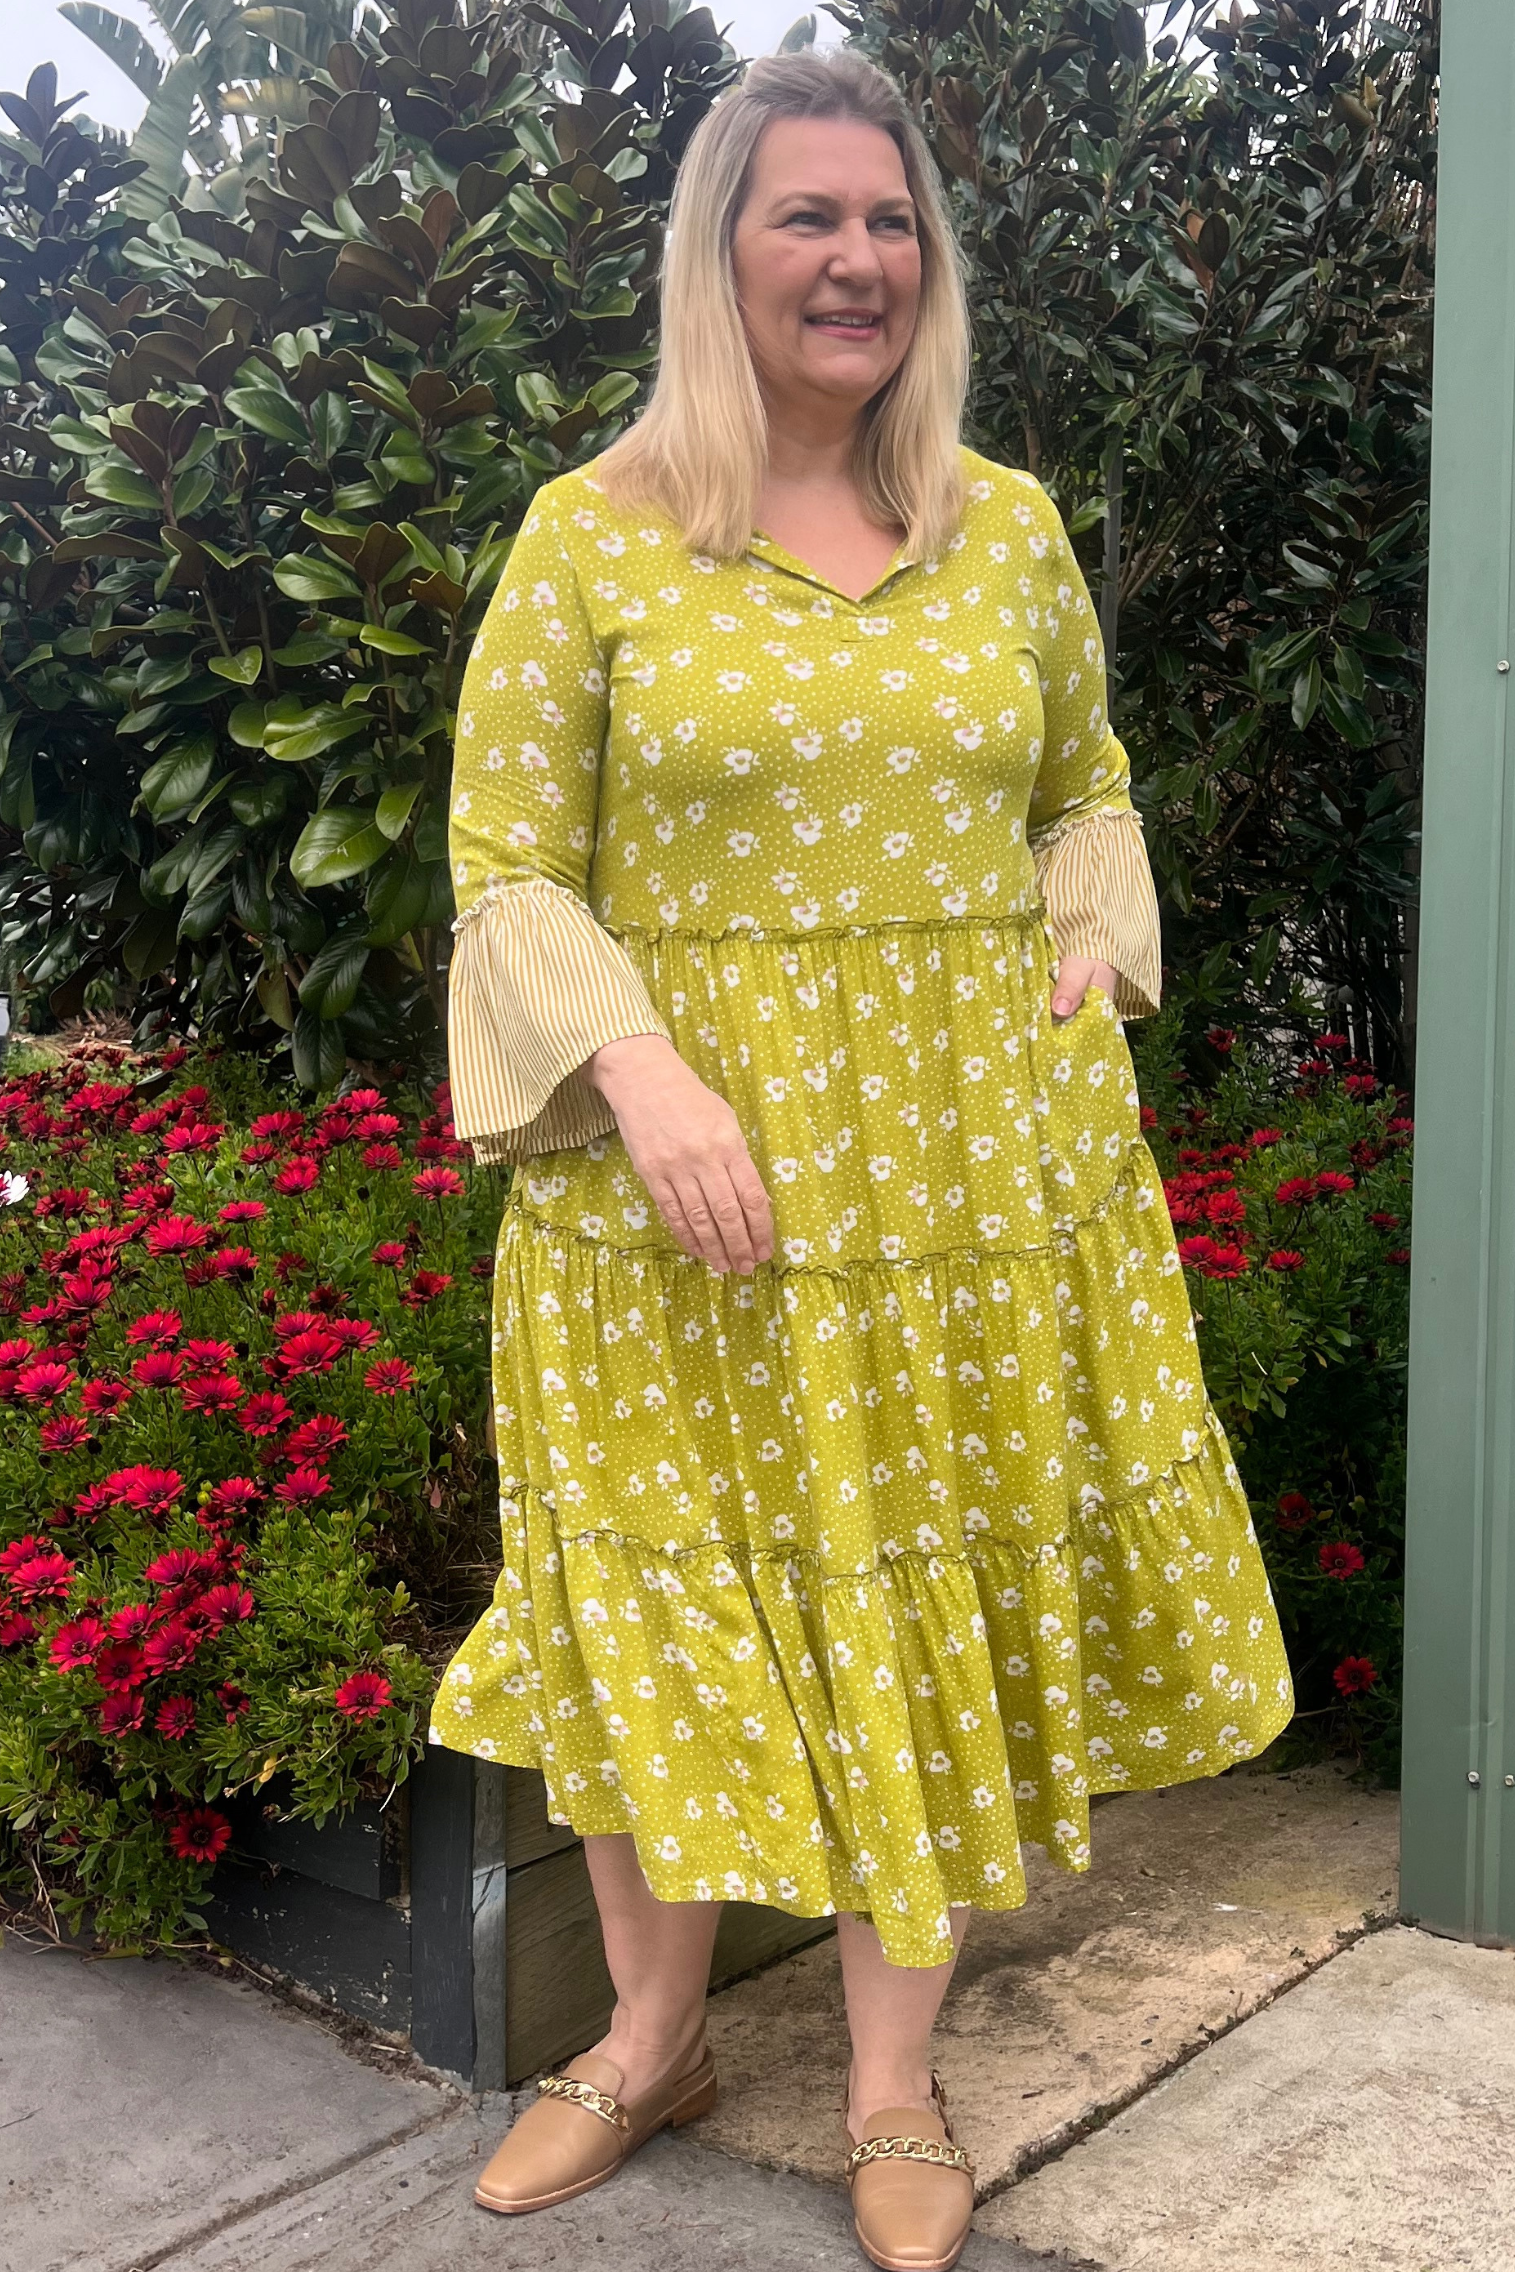 Kita Ku modelling a chartreuse floral layered dress in a garden setting.